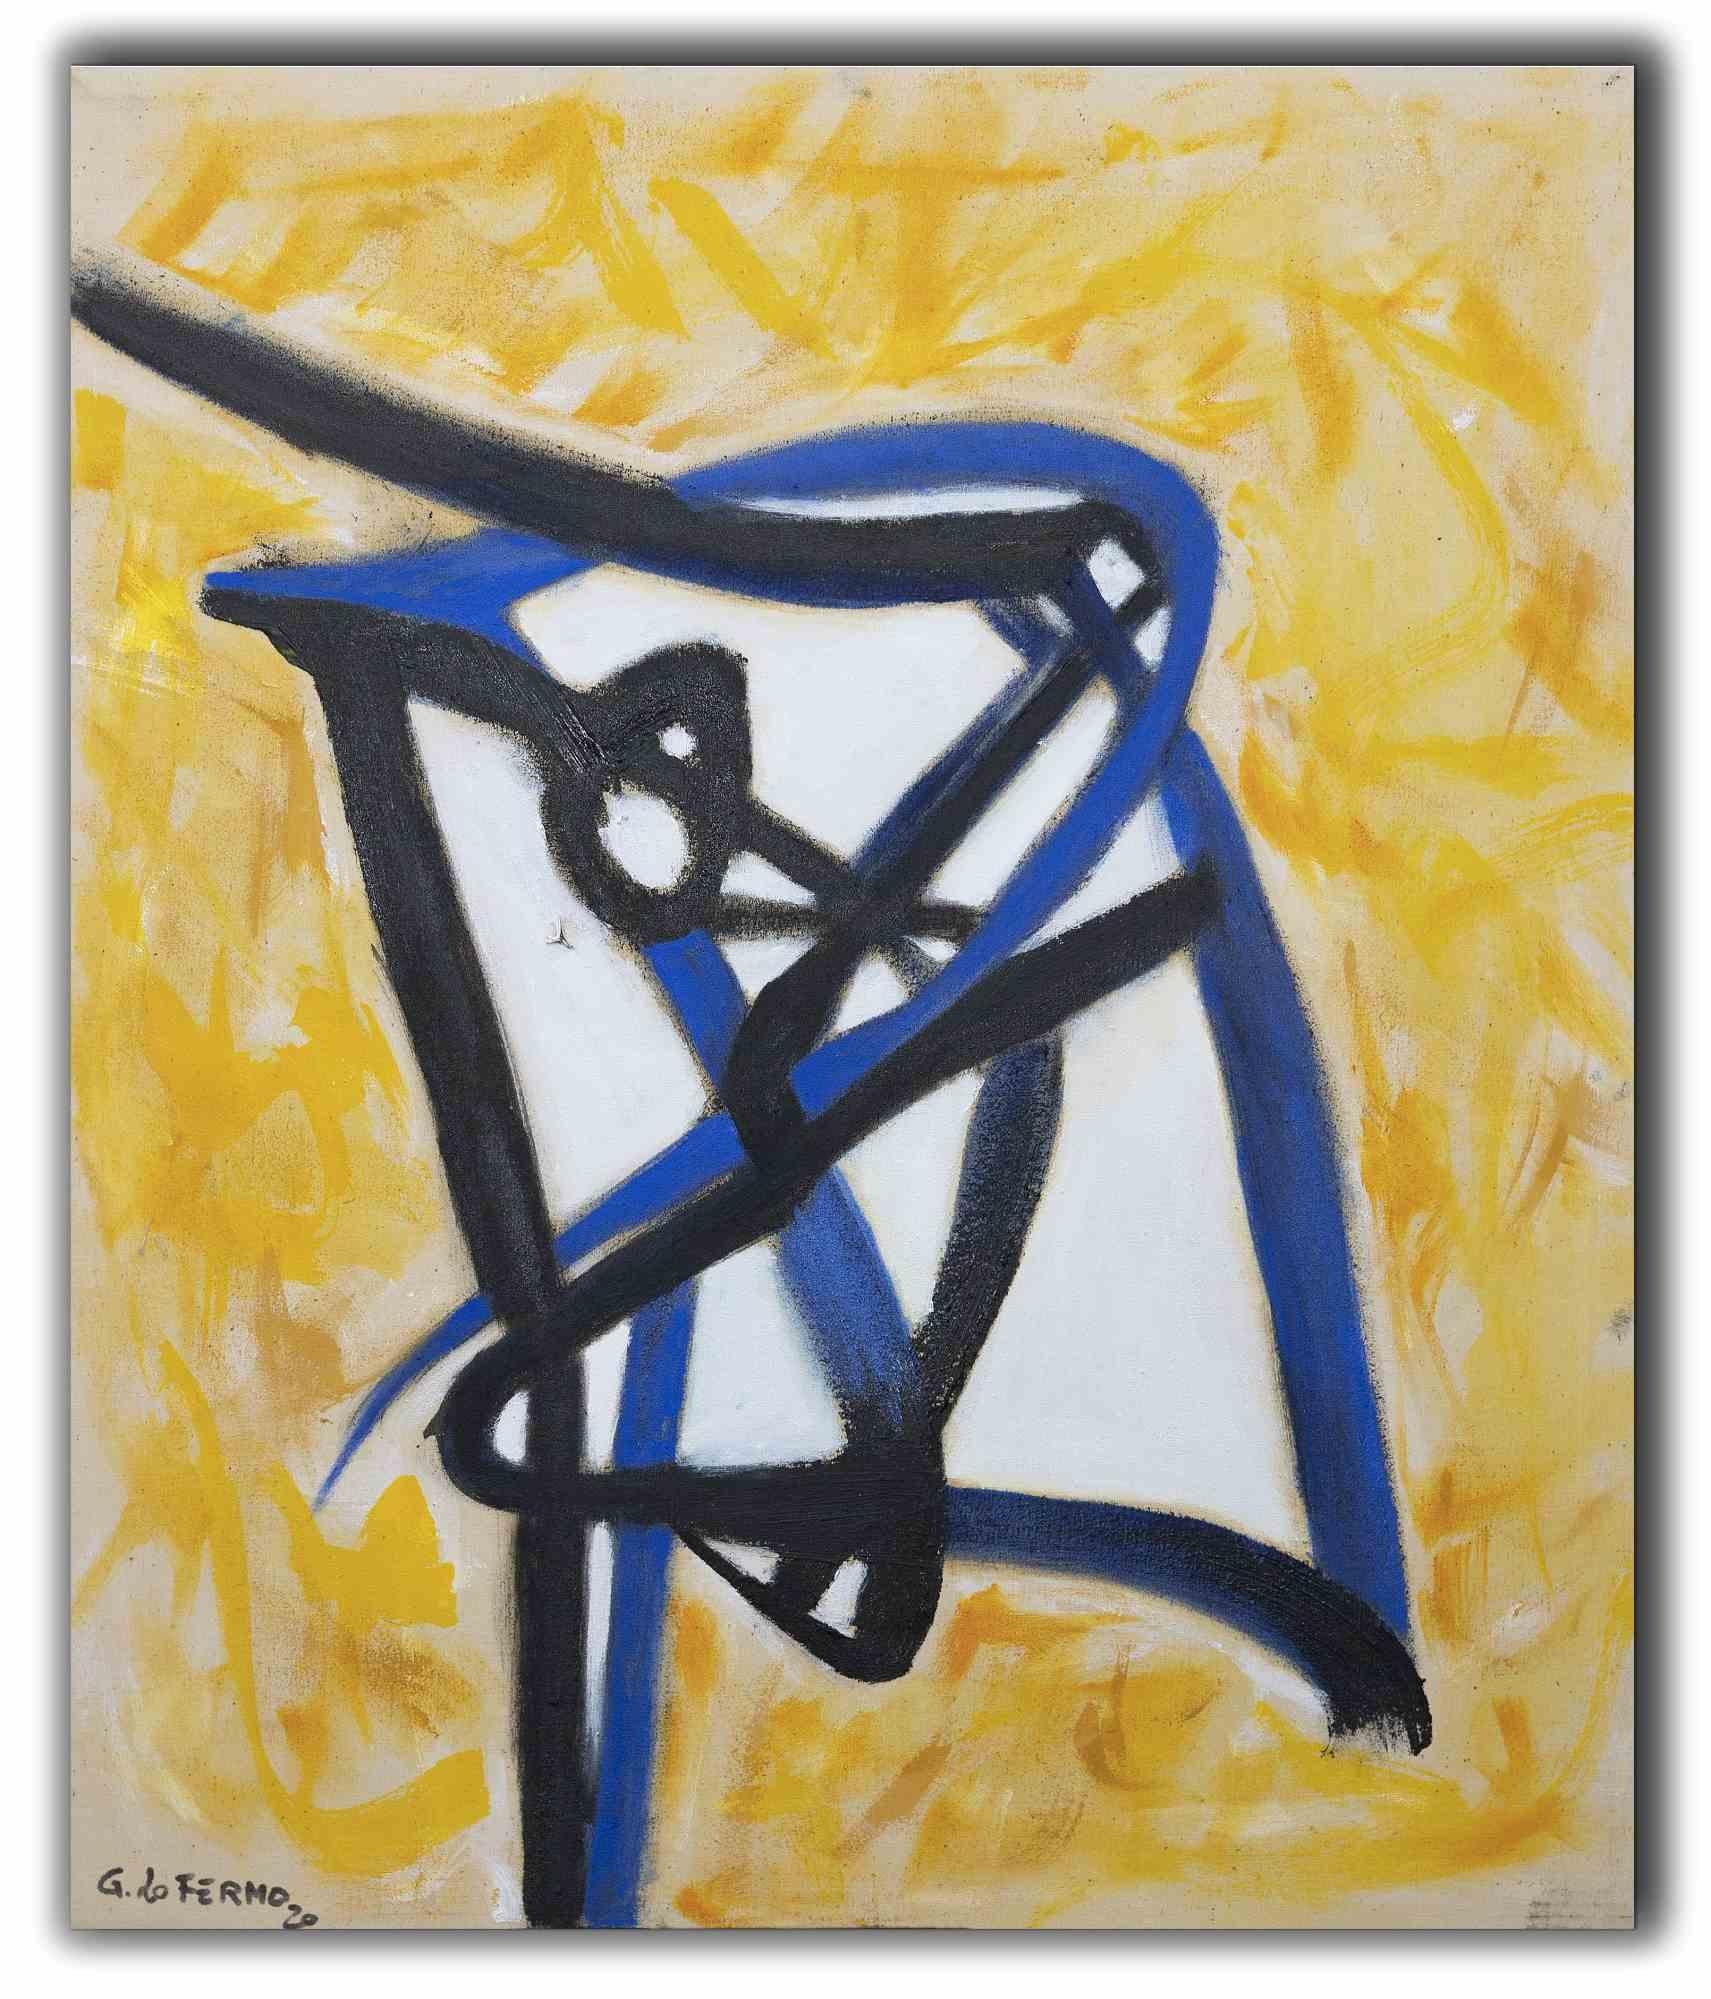 Abstract Expression is an original artwork realized by Giorgio Lo Fermo (b. 1947) in 2021.

Original Oil Painting on Canvas.

Hand-signed, titled and dated on the back of the canvas.

Hand-signed and dated on the lower left corner: G. Lo Fermo